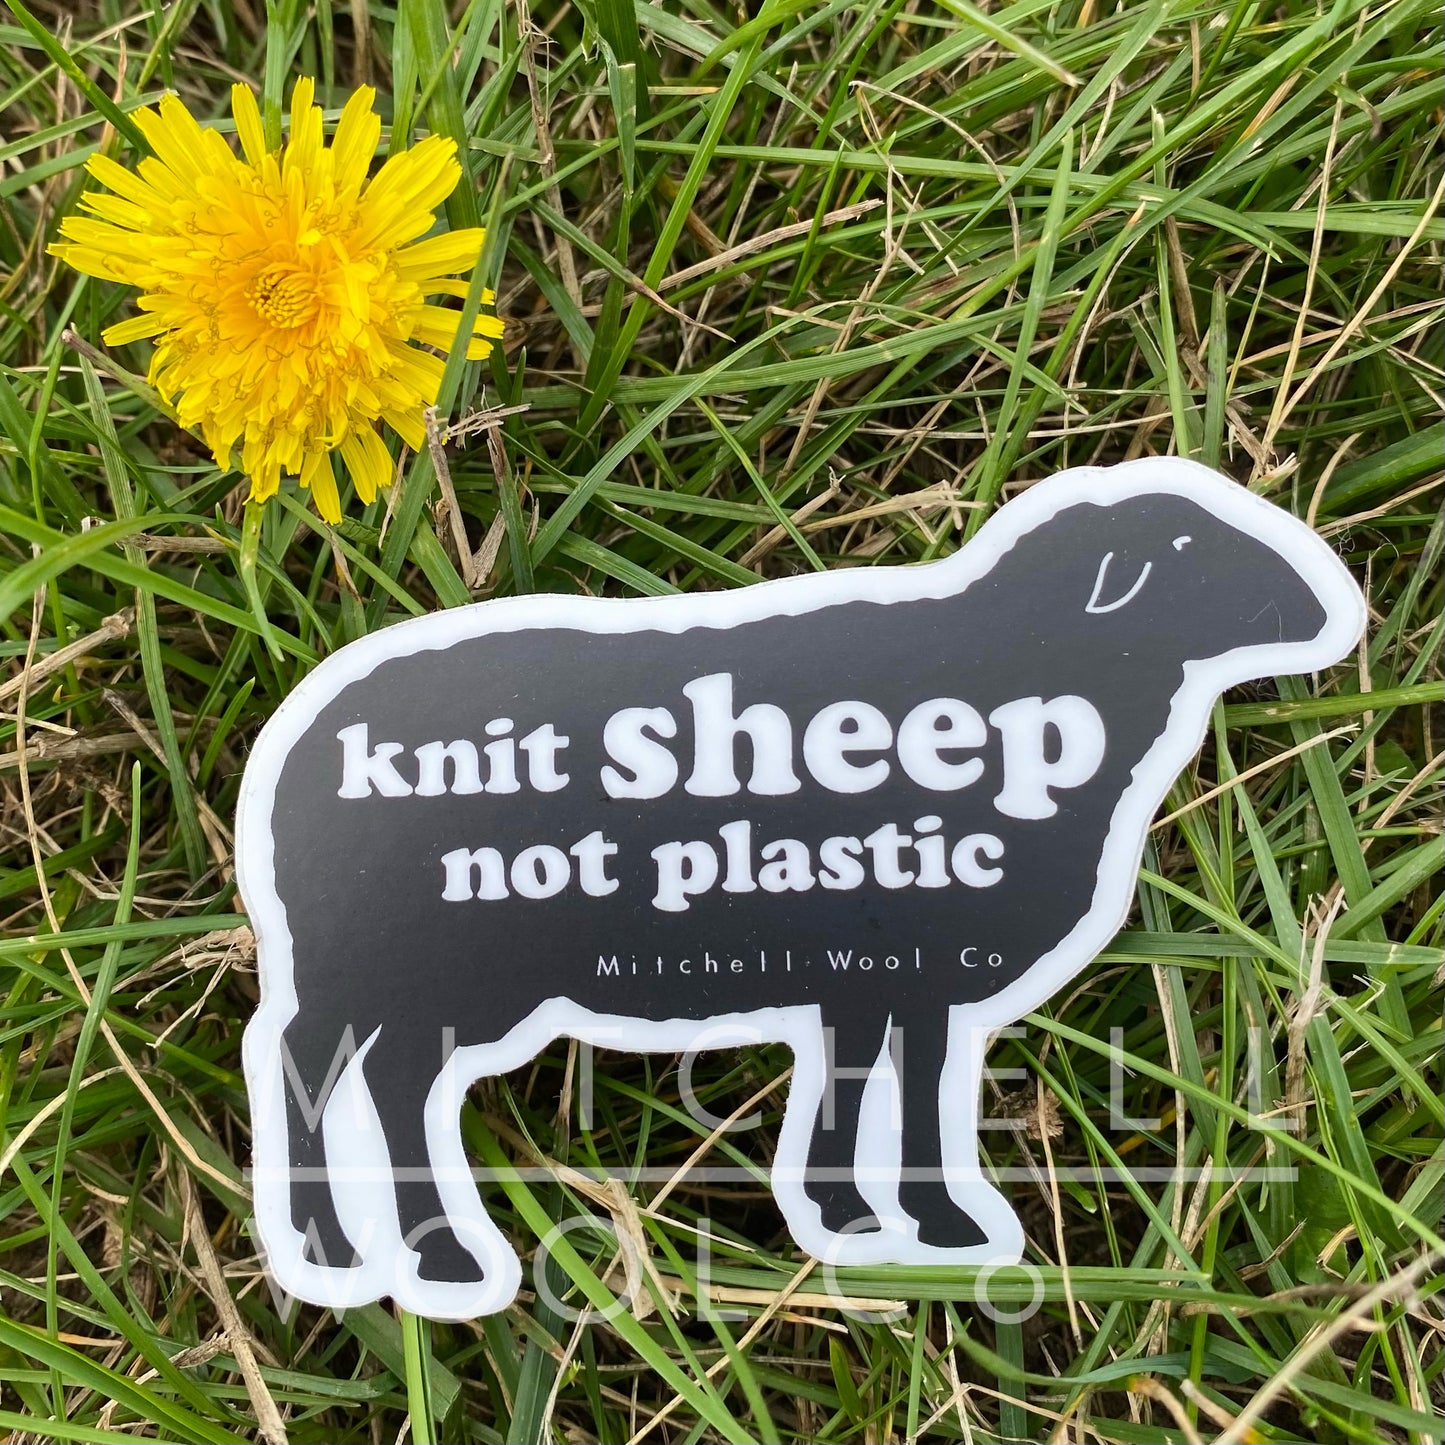 3.5x2.5, black and white sheep silhouette sticker, that says "knit sheep not plastic"  